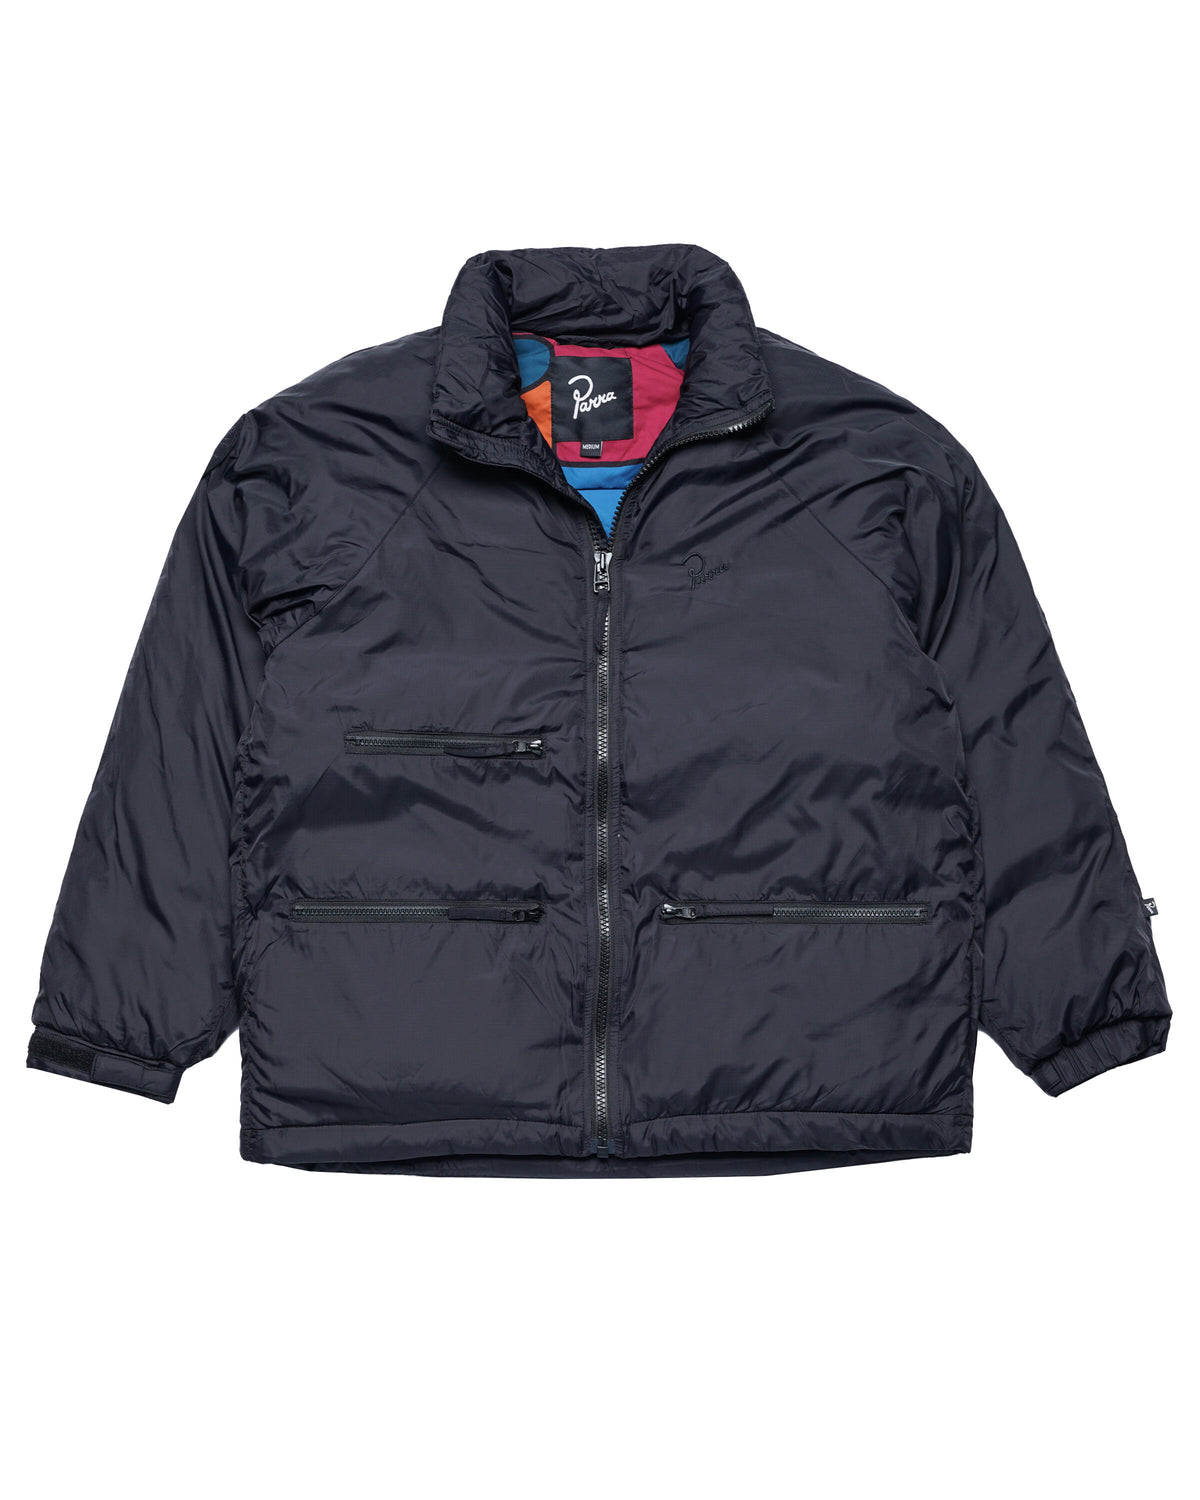 by Parra canyons all over jacket